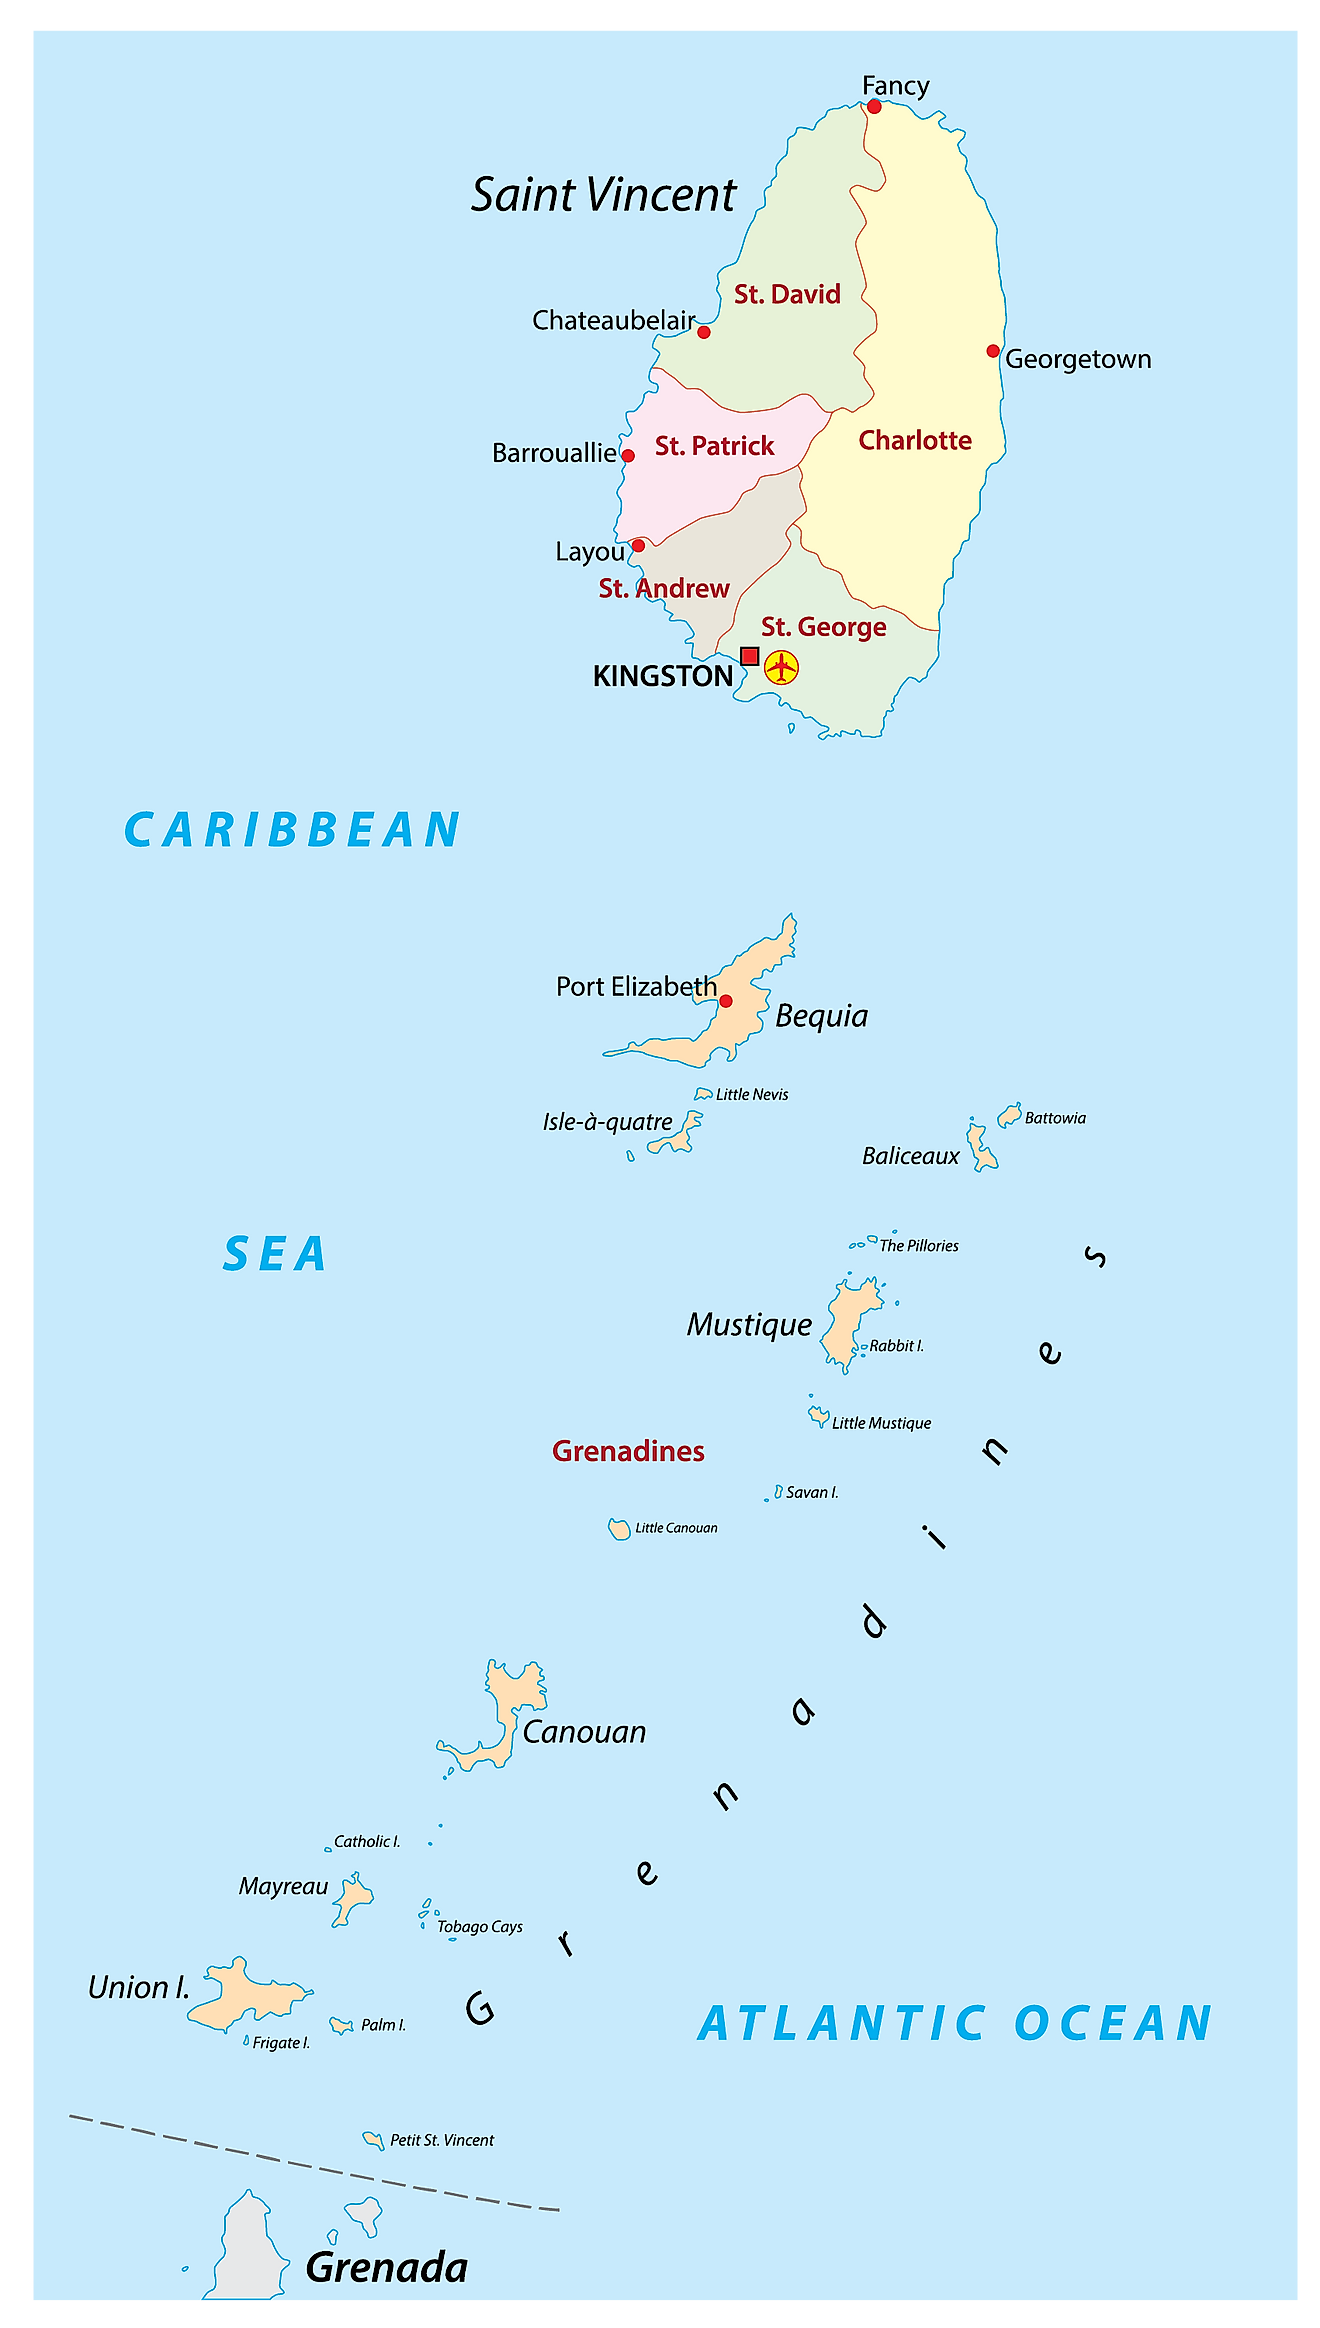 In grenadines and western st the union vincent Western Union